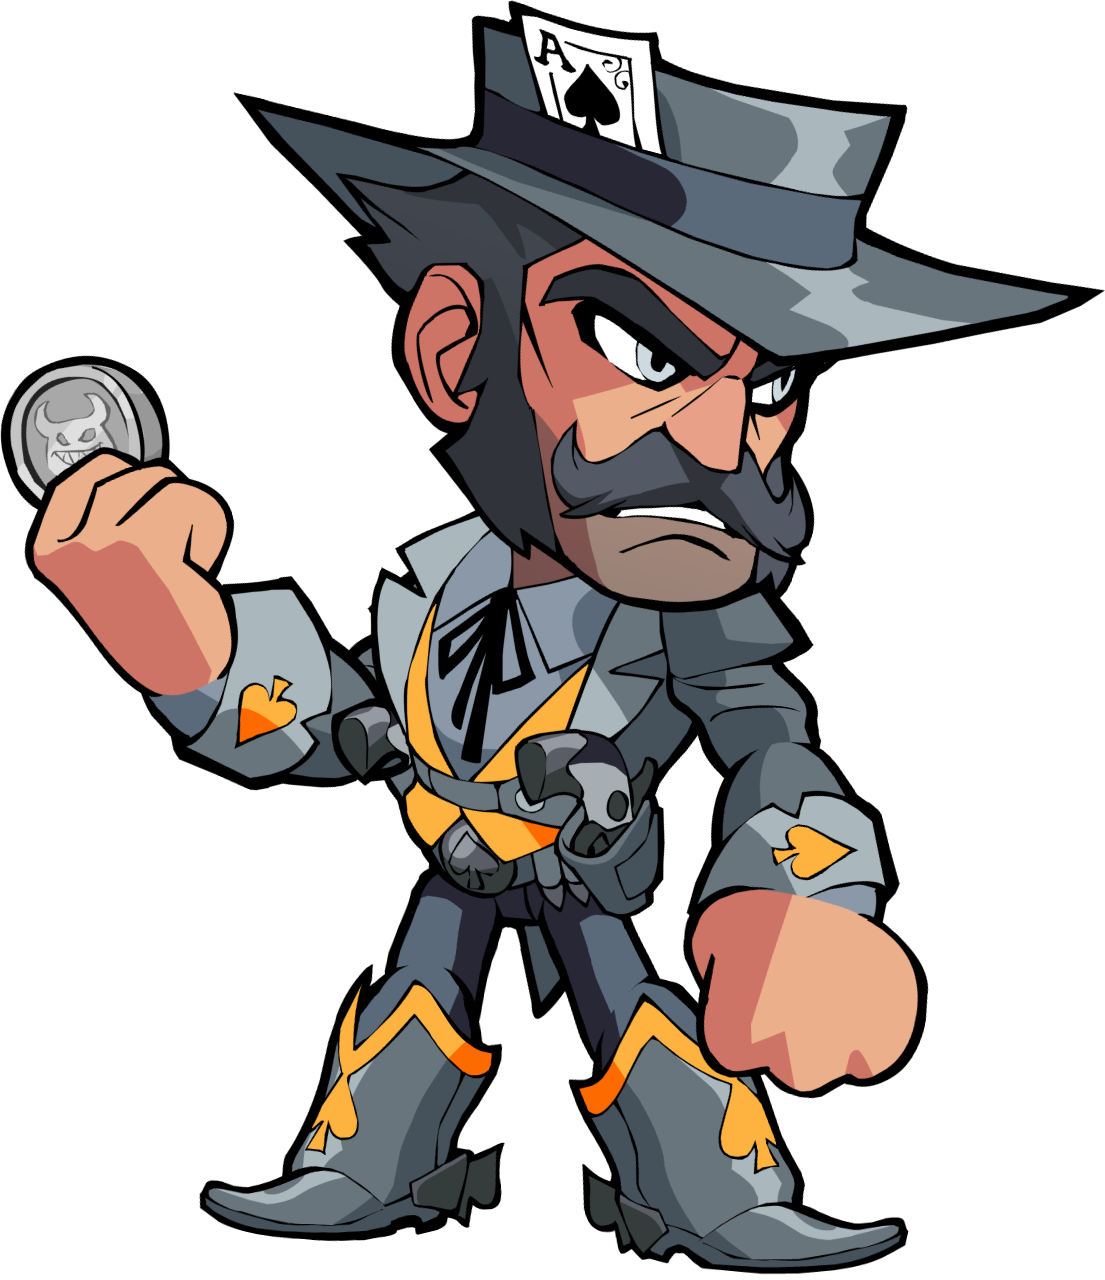 https://static.wikia.nocookie.net/brawlhalla_gamepedia/images/5/51/Double_Cross_Grey.png/revision/latest?cb=20210621053755